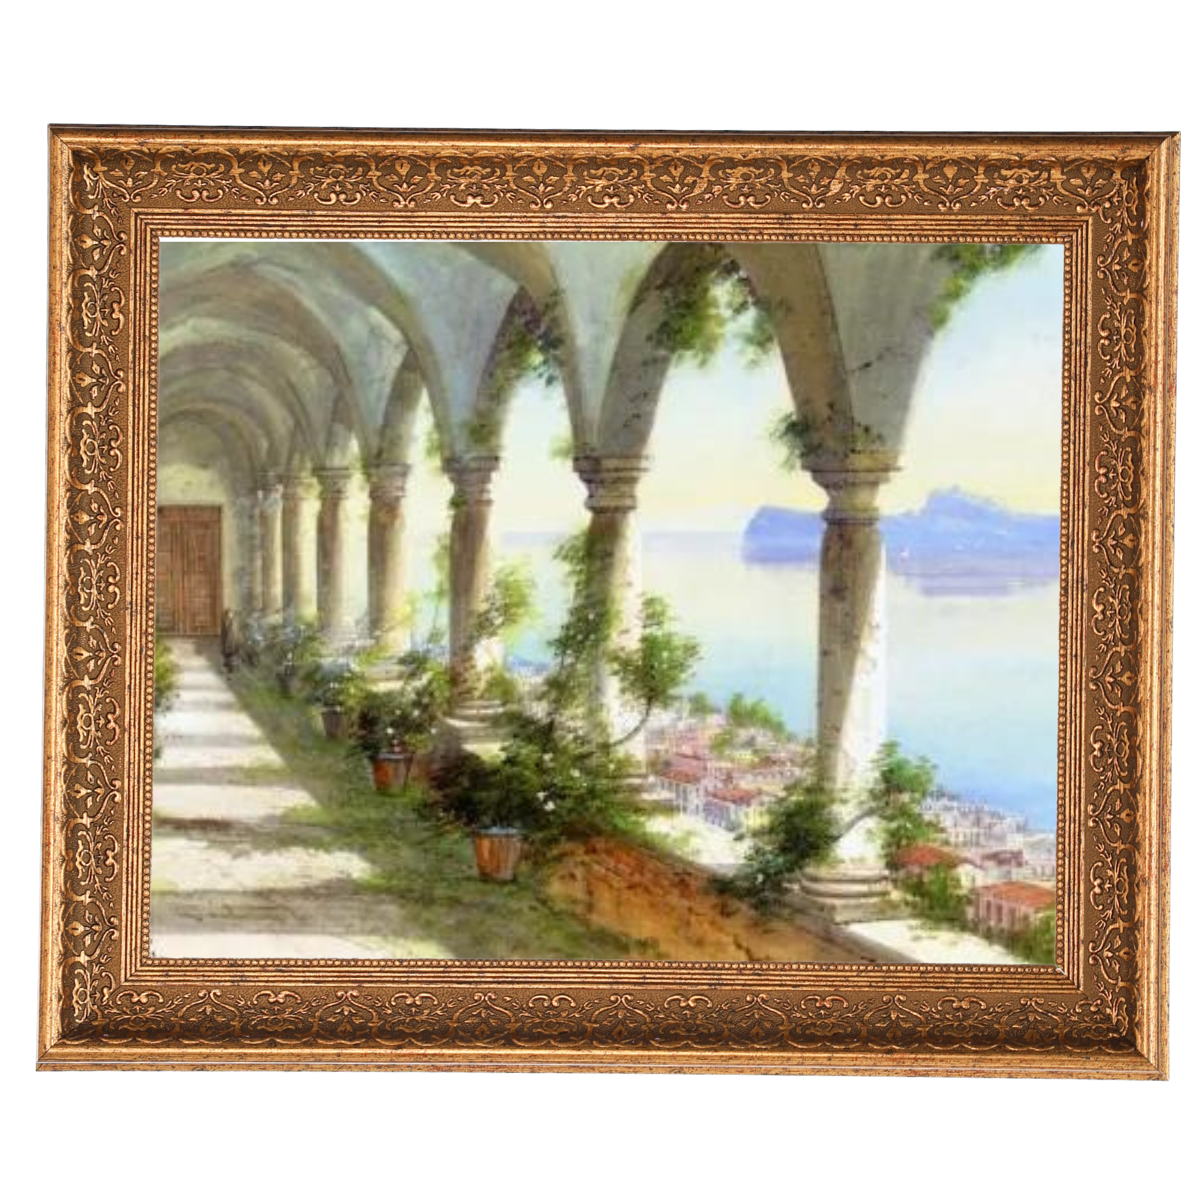 A Colonnade Overlooking the Isle of Capri - Vintage Wall Art Prints Framed  For Living Room